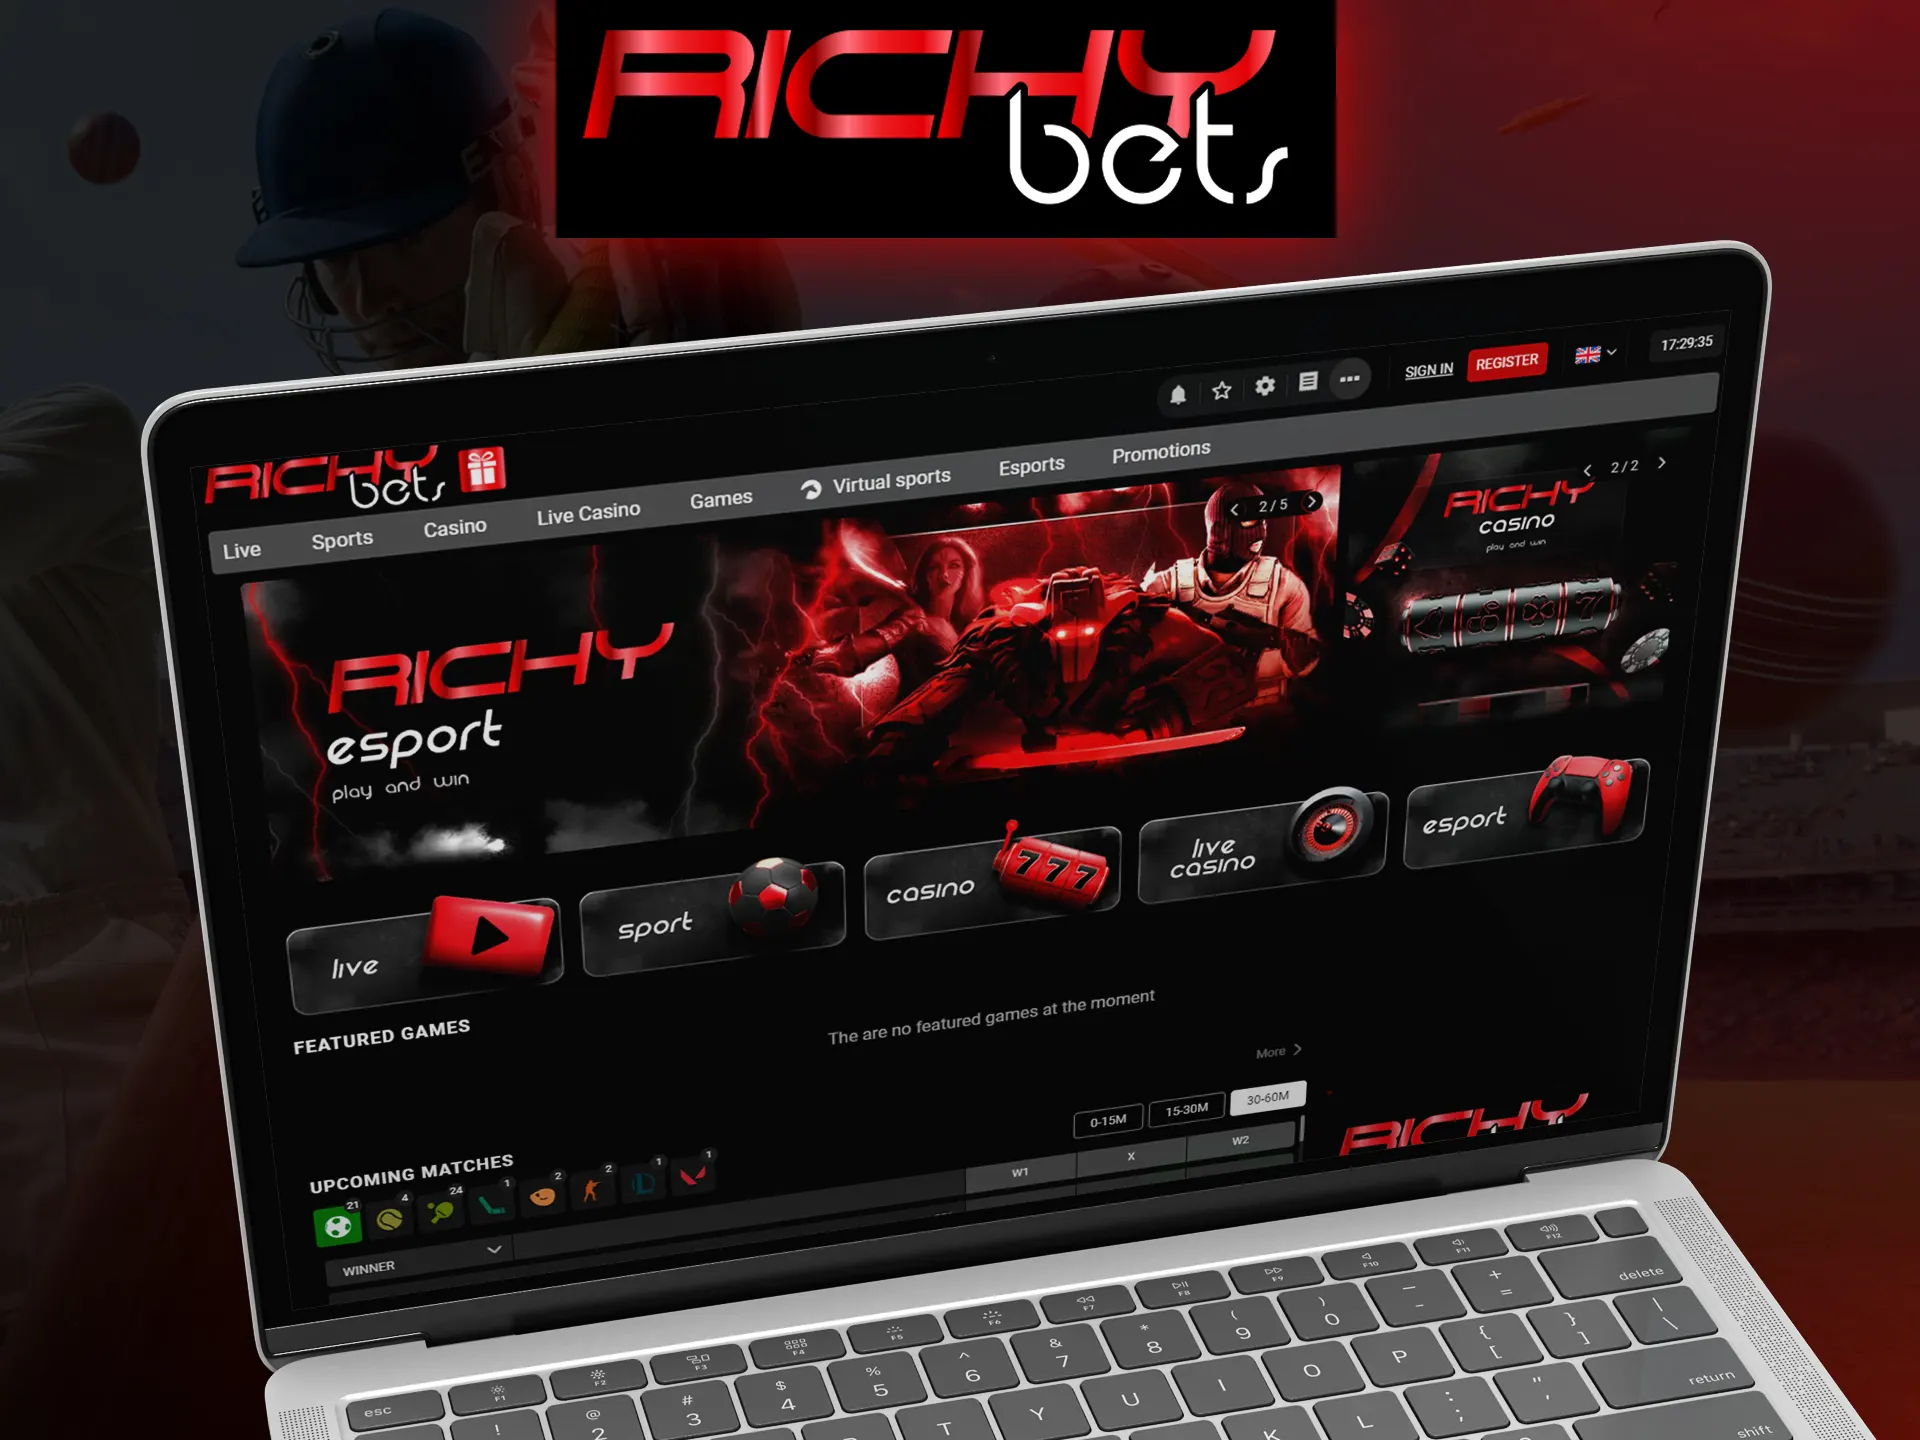 Install the Richybets PC client for betting using a PC.